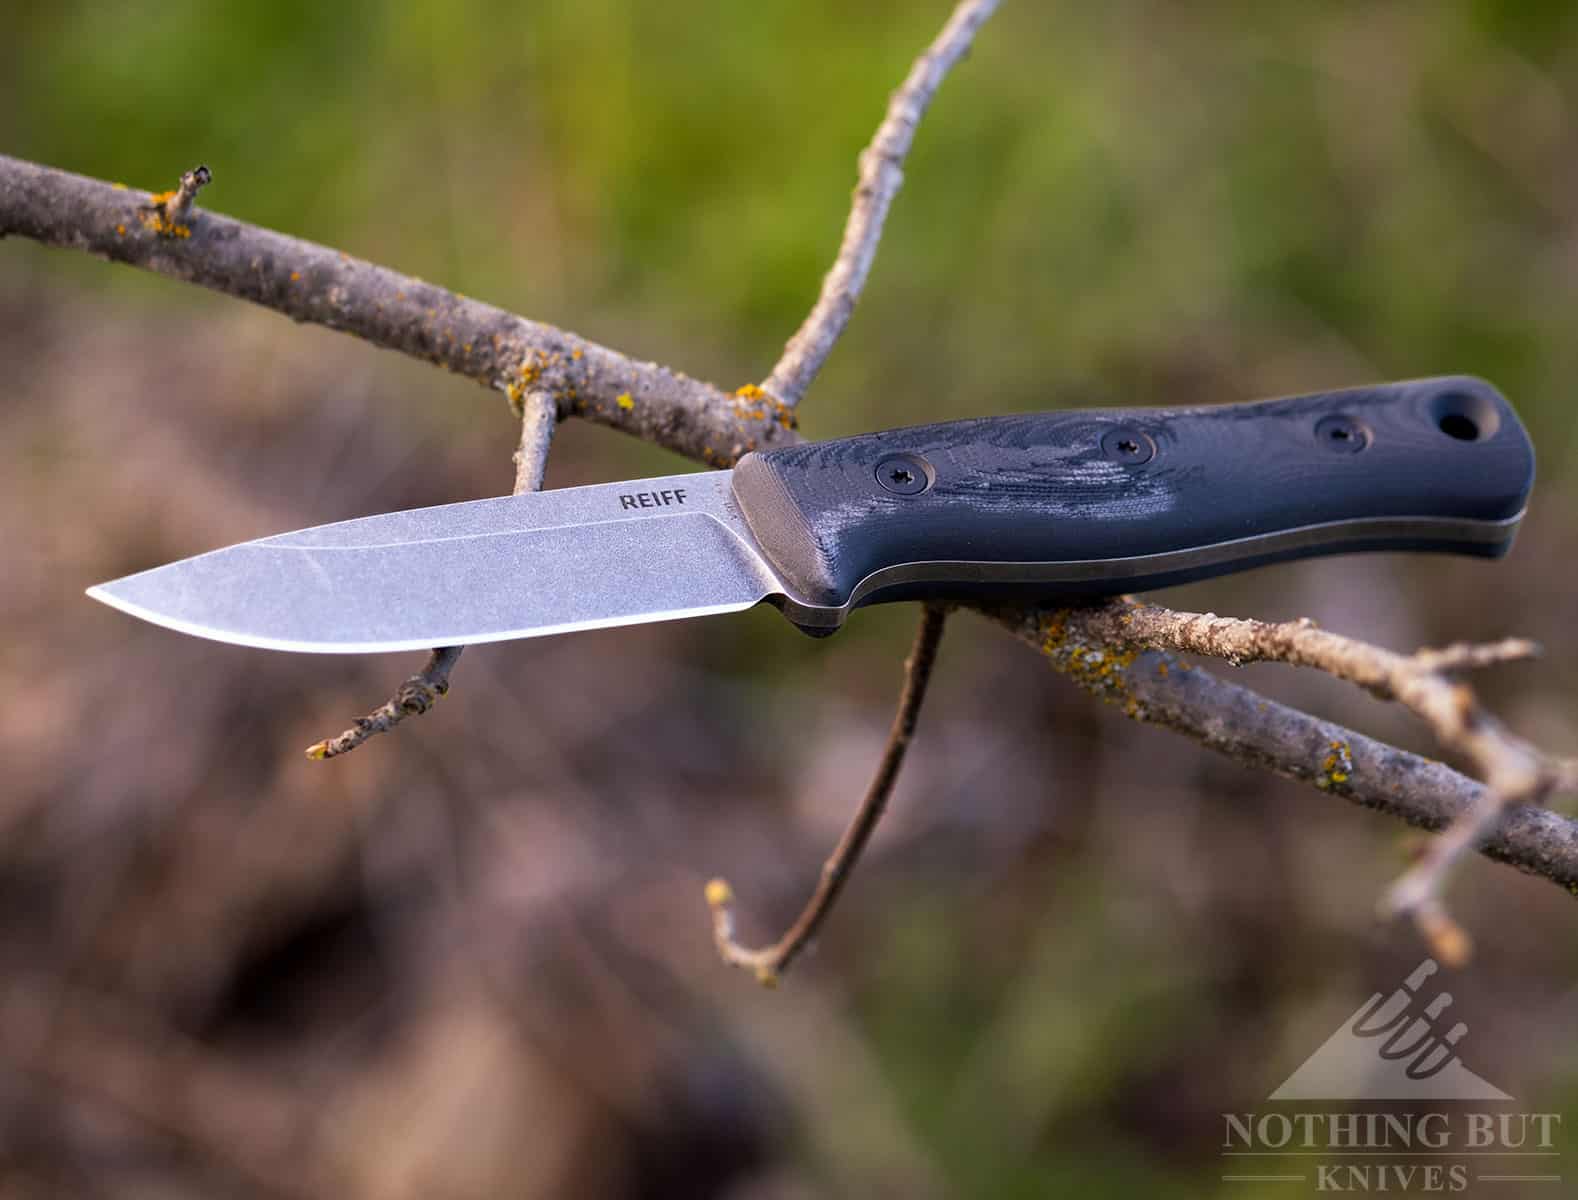 The Reiff F4 has two options for a sheath. It ships with either a leather sheath or a kydex sheath. 